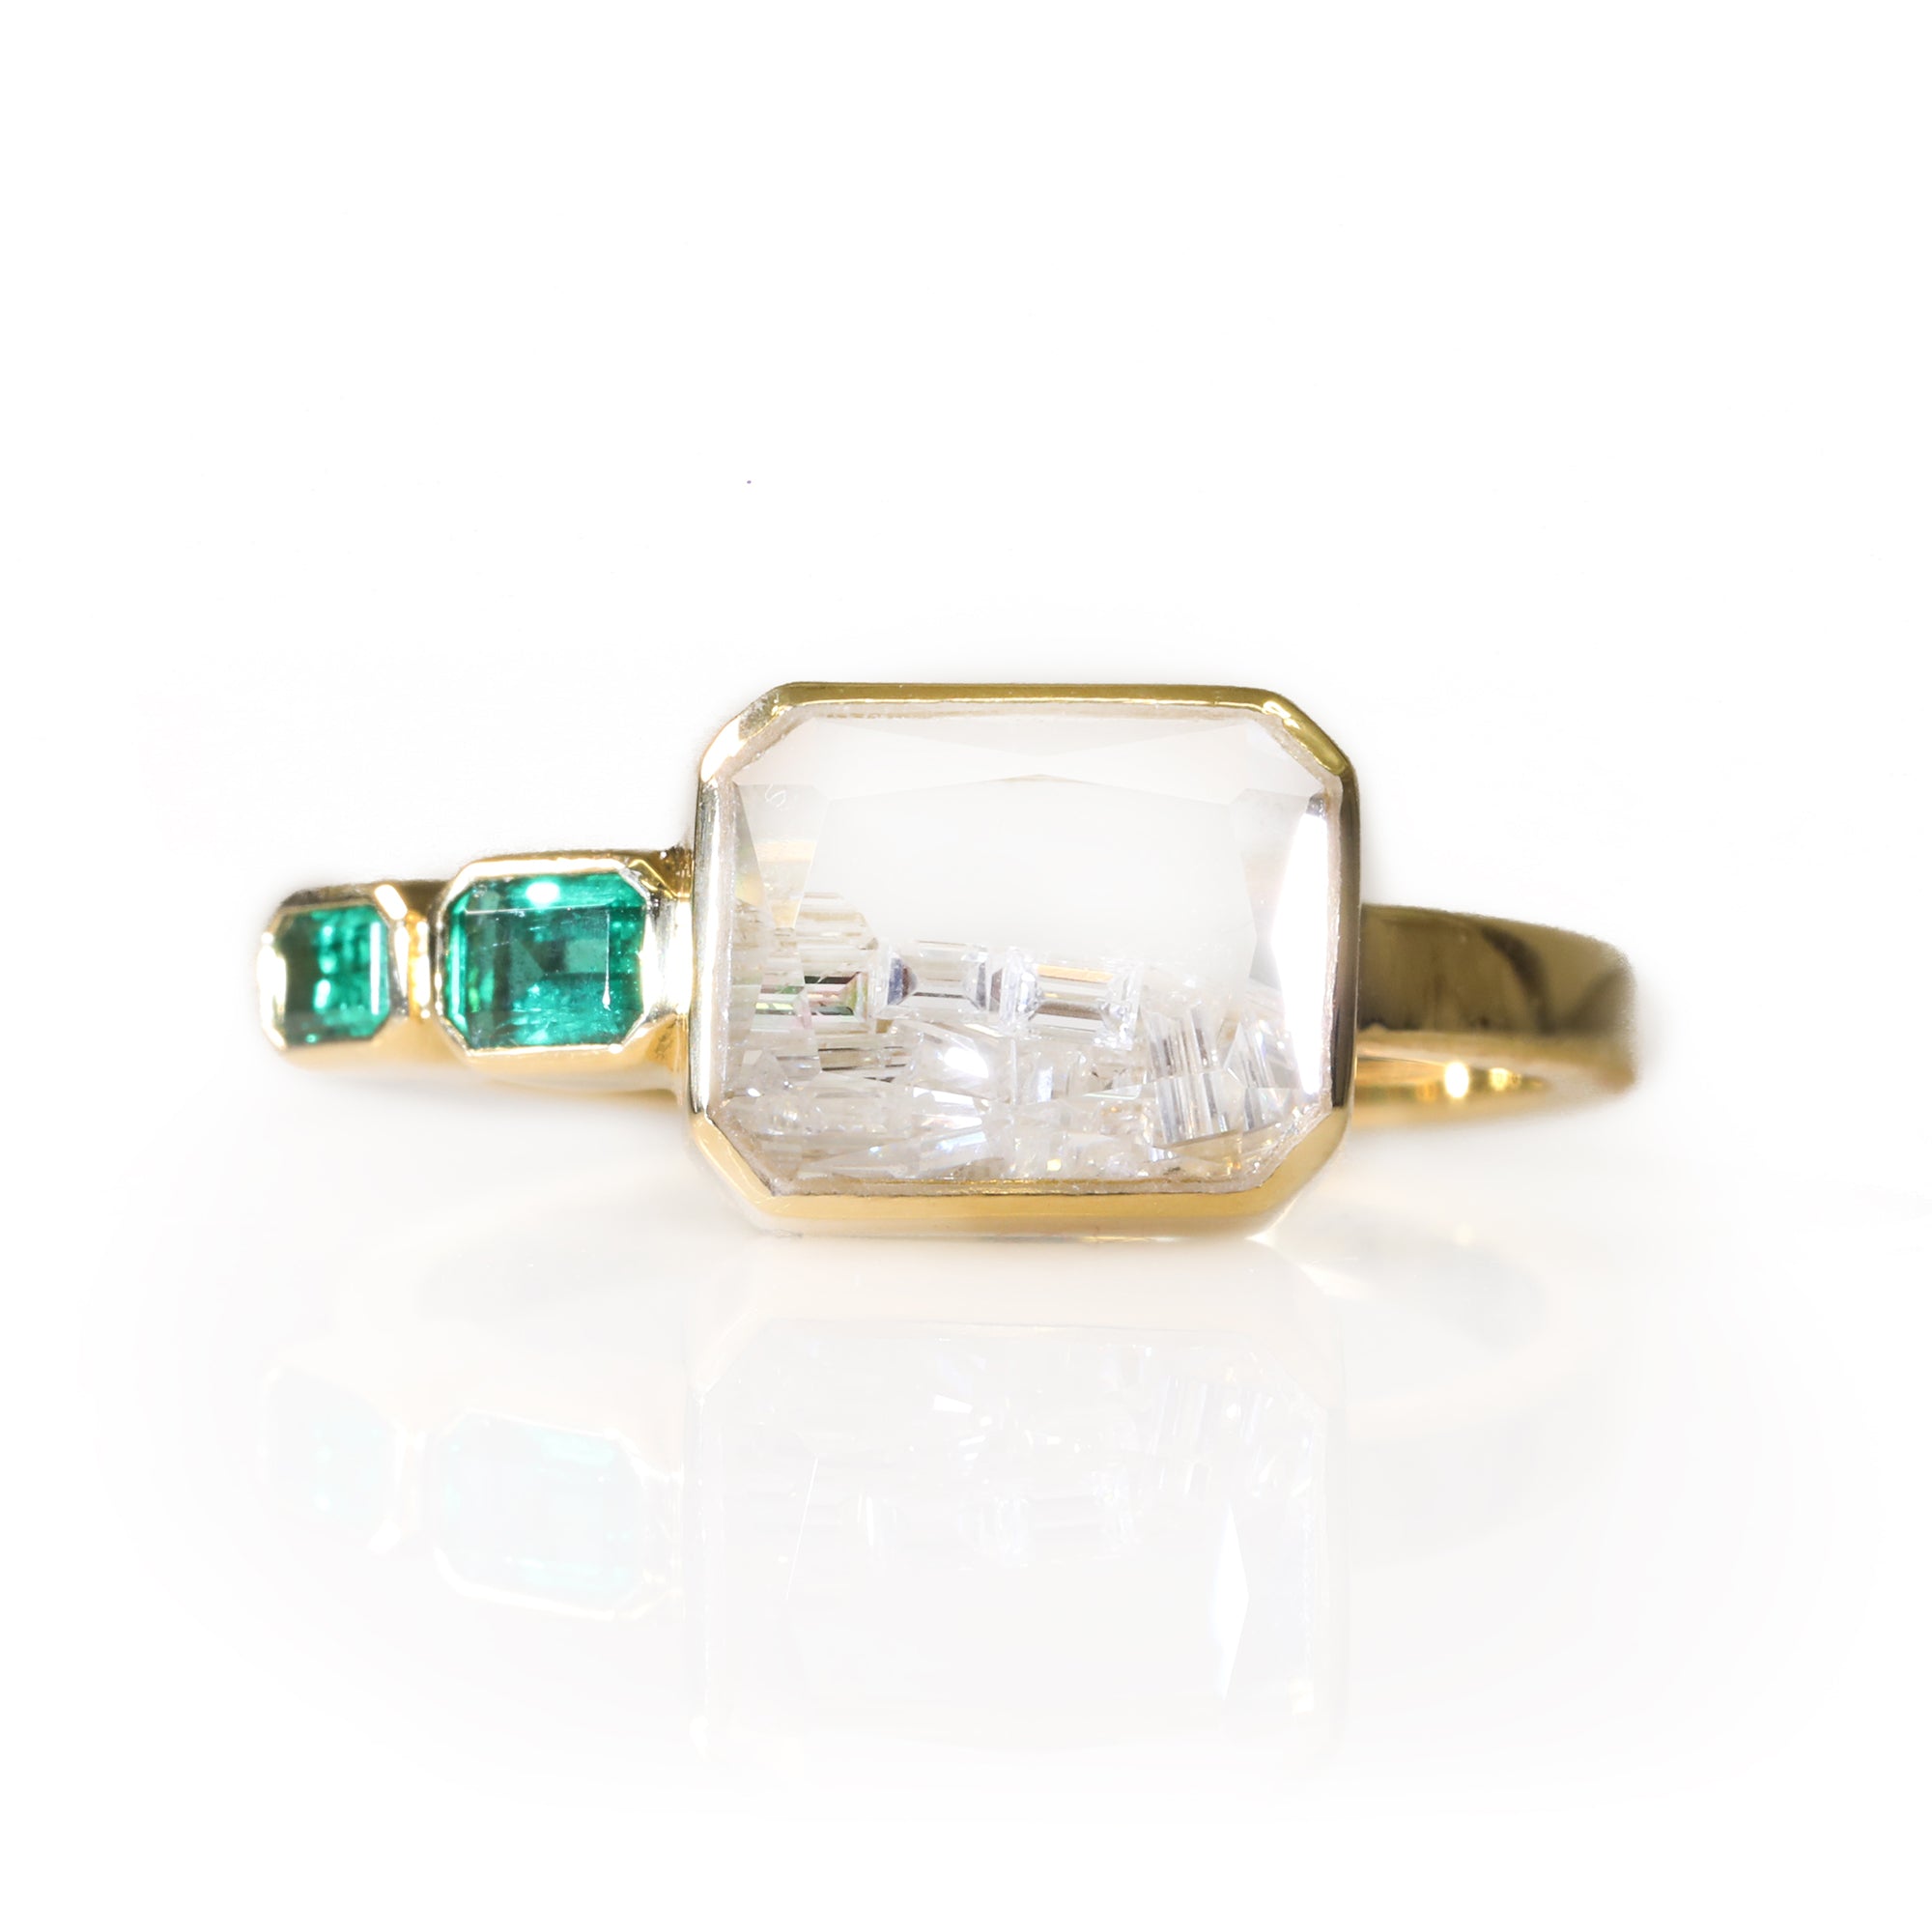 Moritz Glik Gold Ring with Diamond &quot;Shake&quot; and Emerald Baguette Details